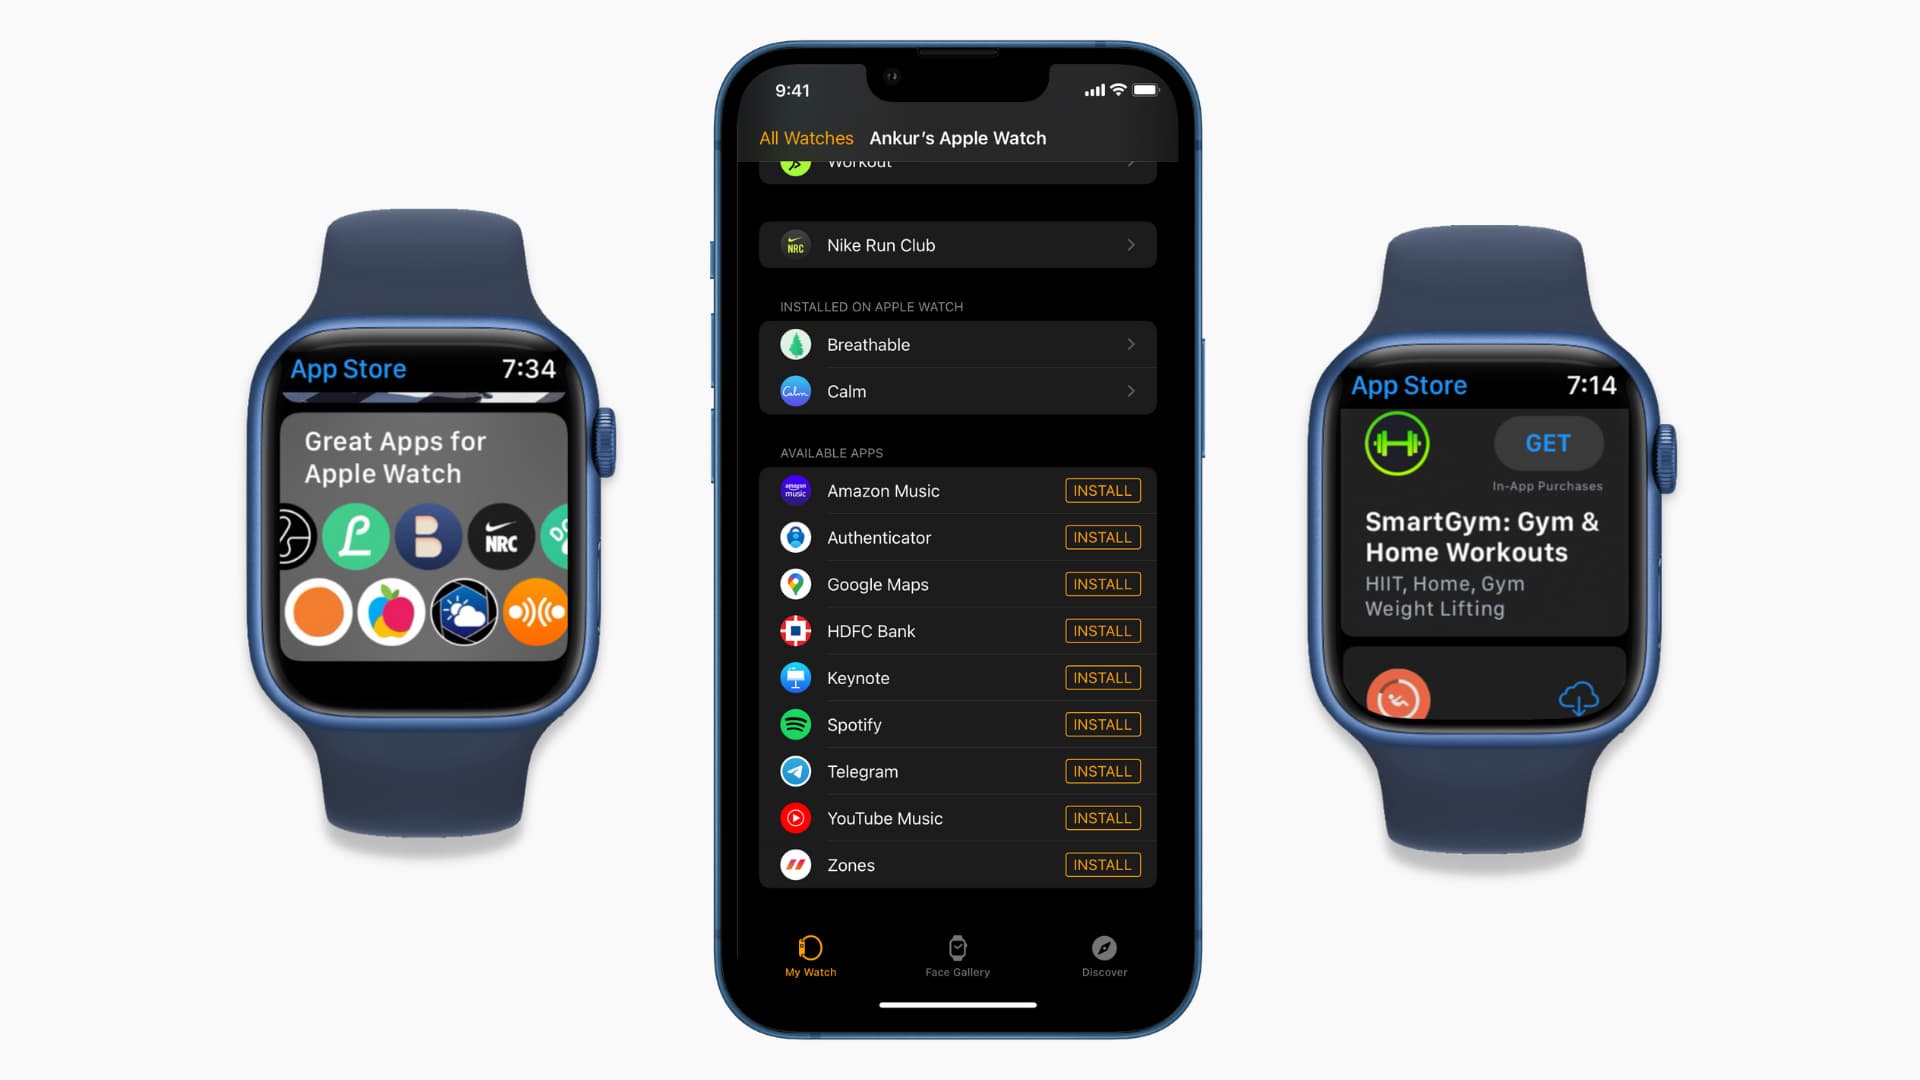 Download apps on Apple Watch